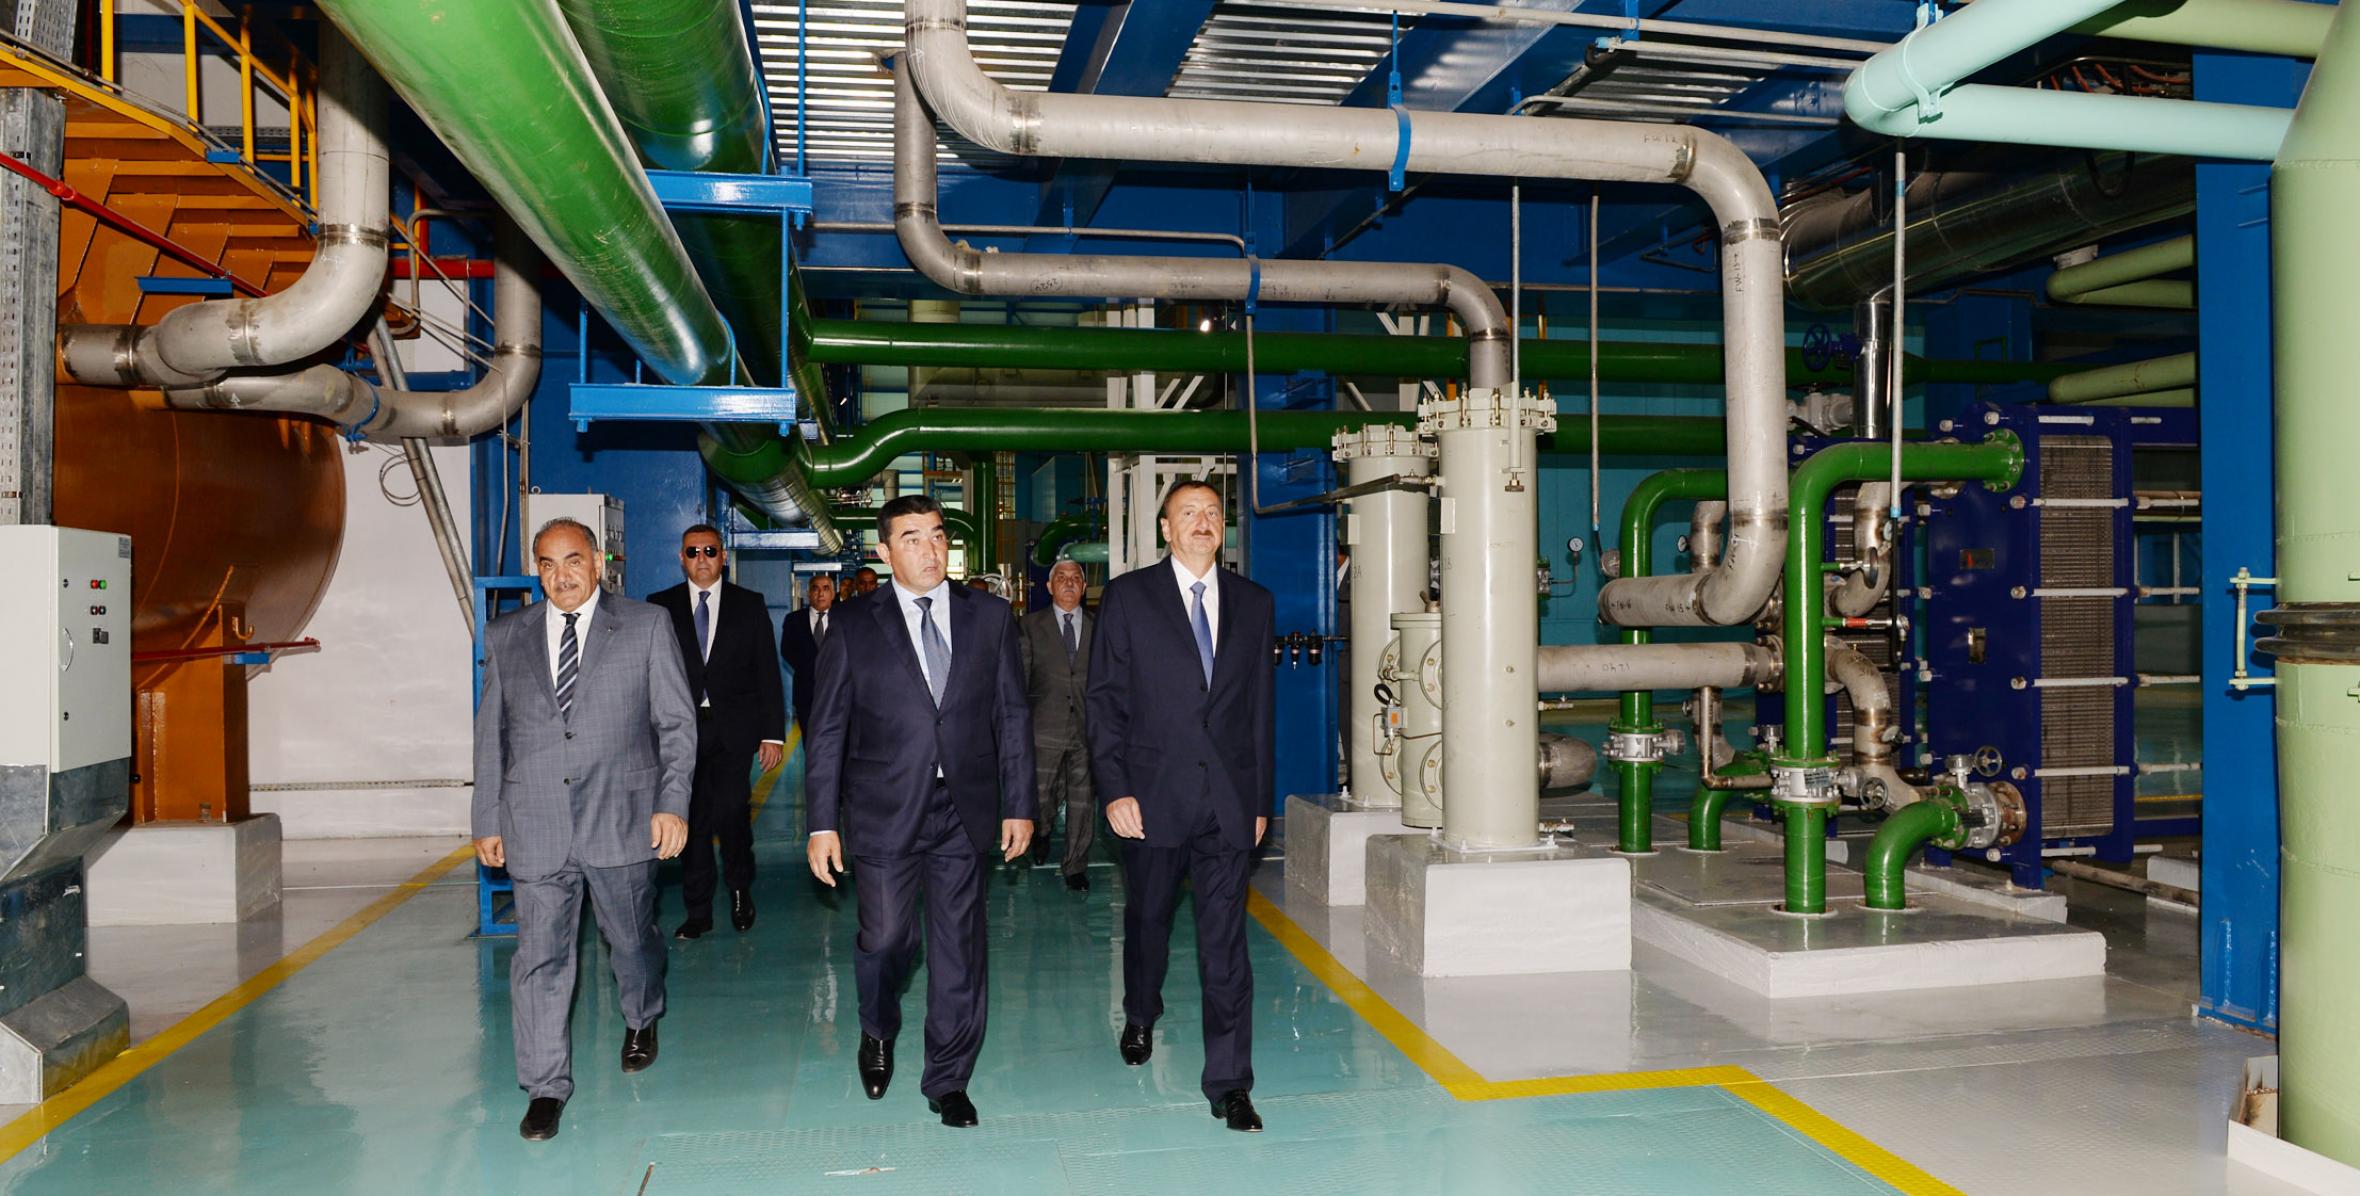 Ilham Aliyev attended the opening of the “Janub” power station in Shirvan